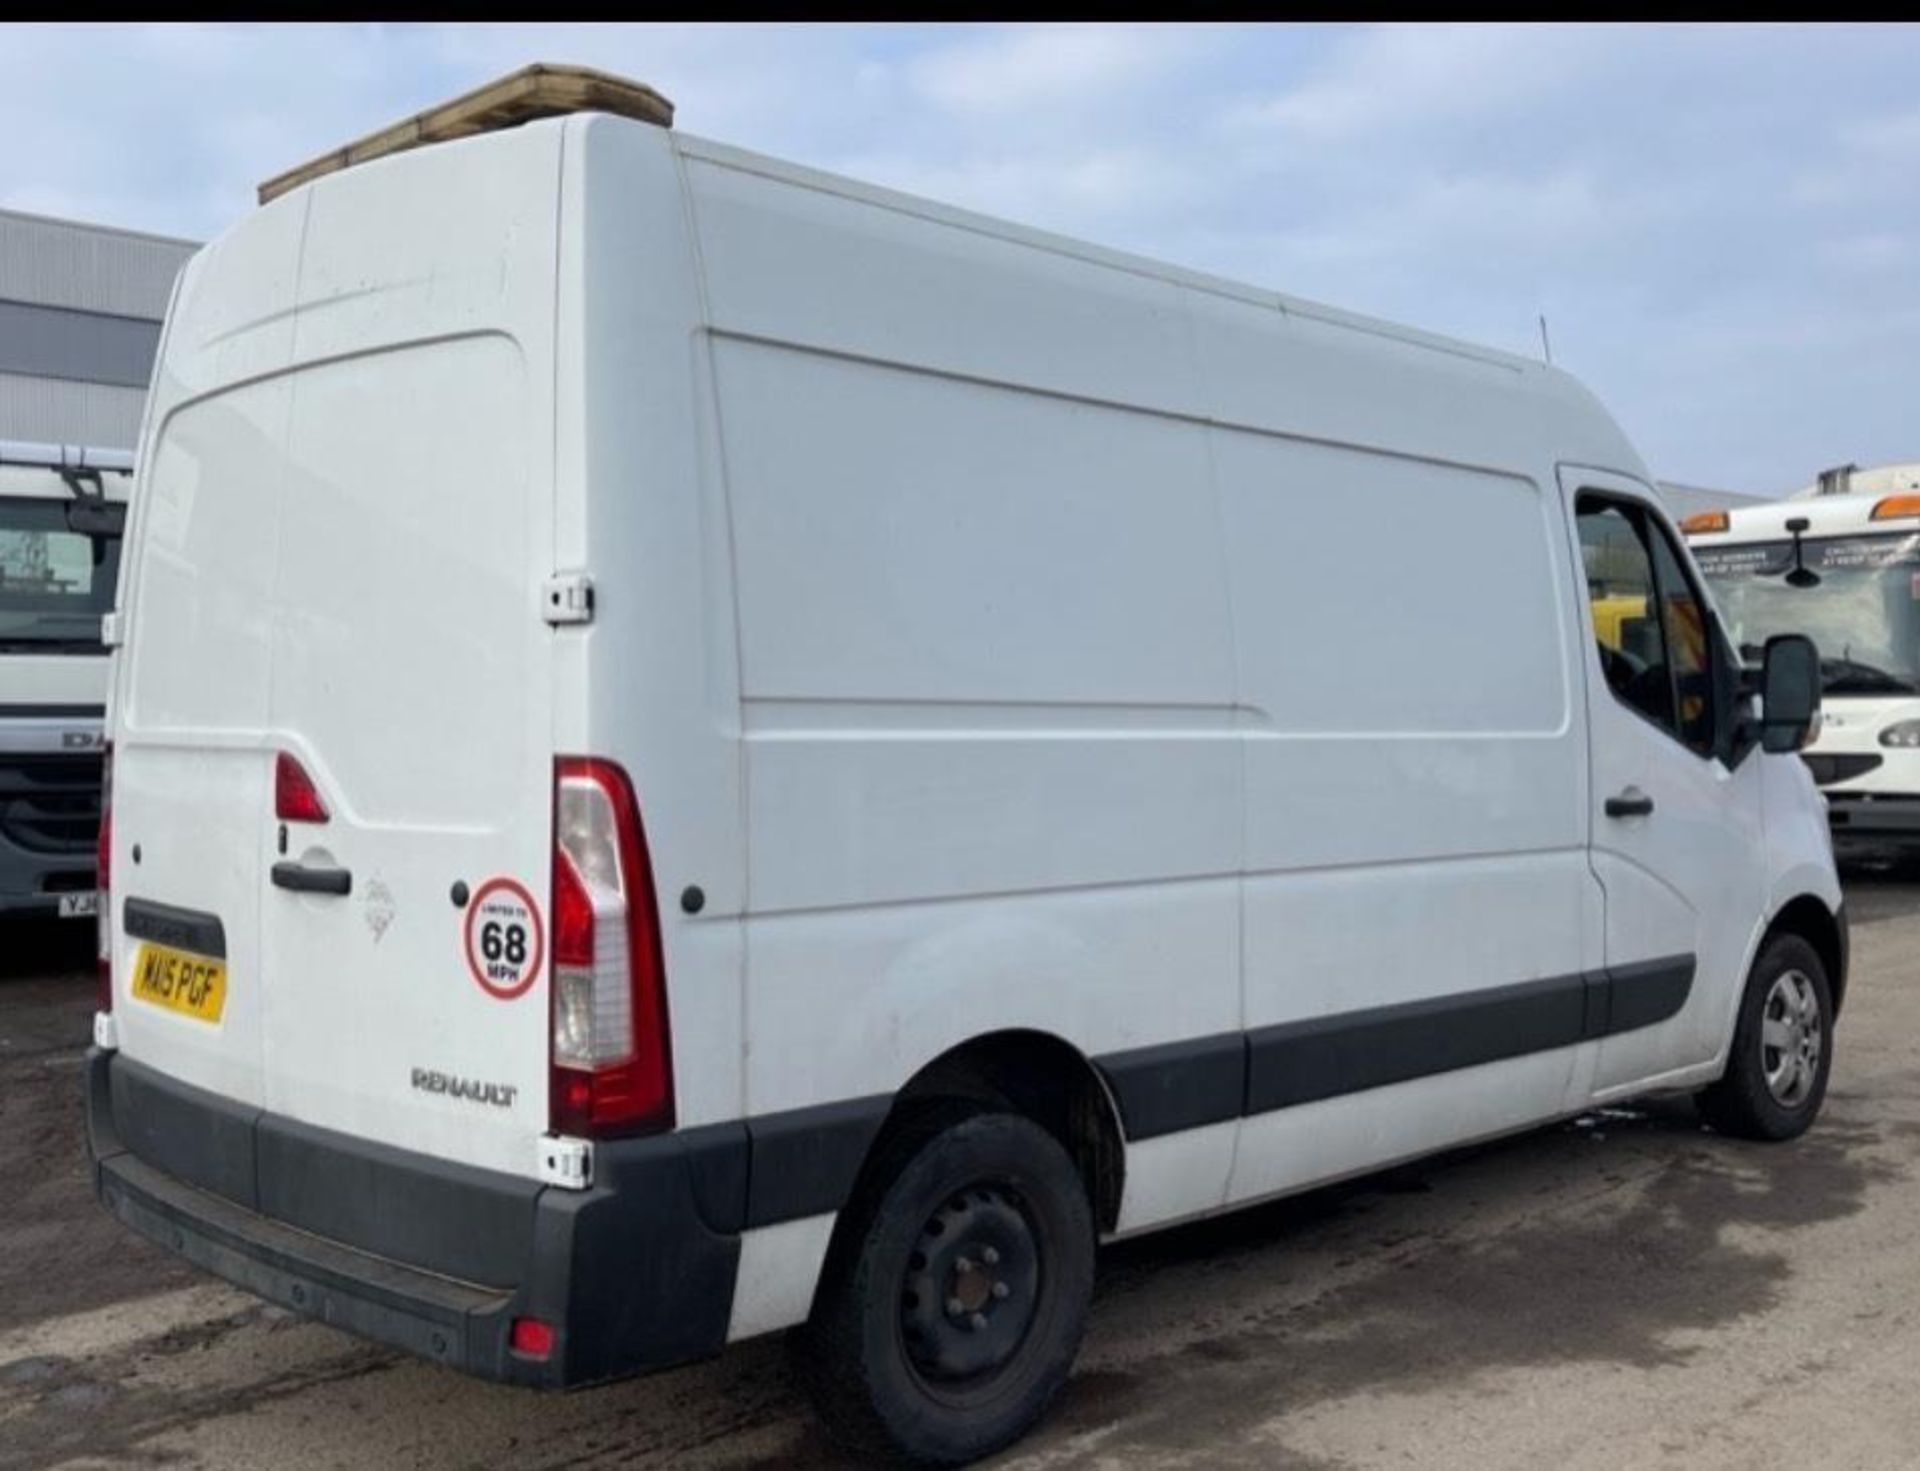 2019 RENAULT MASTER- 207K MILES- HPI CLEAR - READY TO GO! - Image 4 of 11